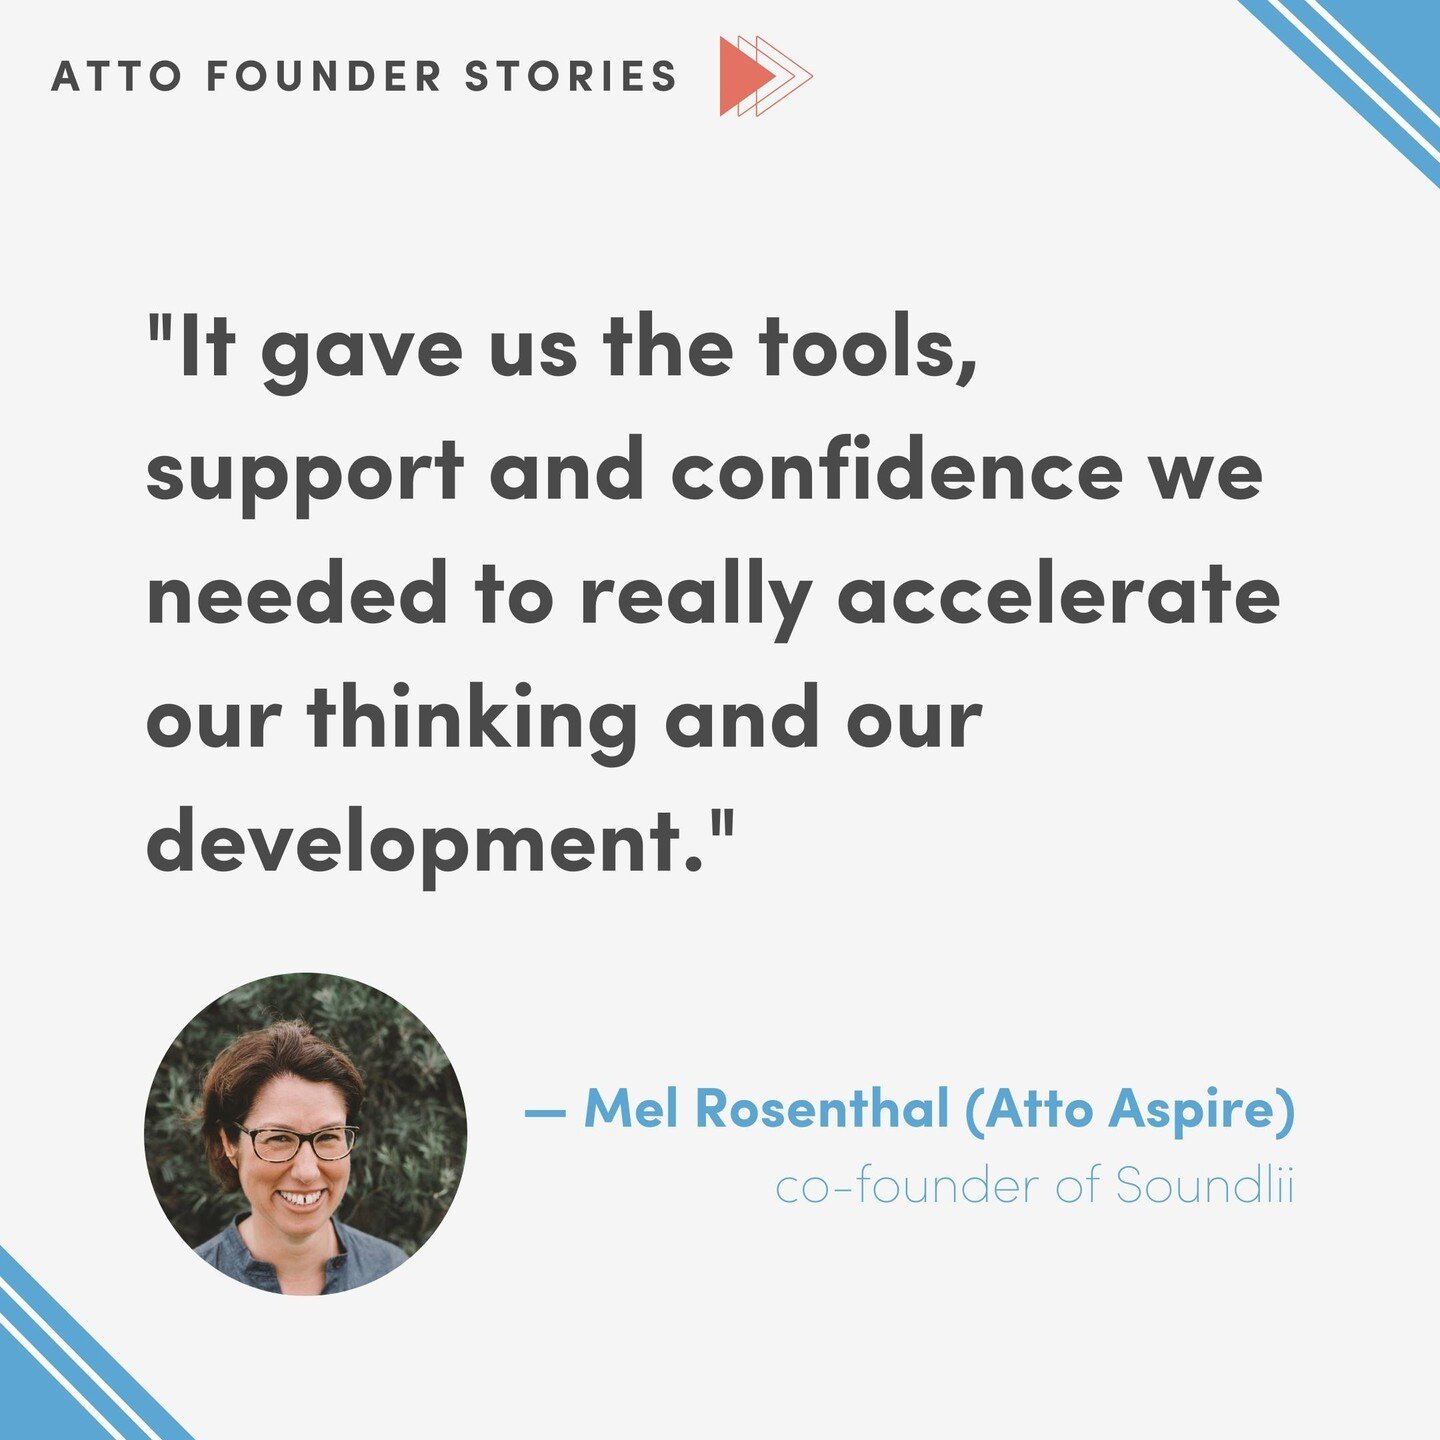 &quot;It gave us the tools, support and confidence we needed to really accelerate our thinking and our development.&quot;
&mdash; Mel Rosenthal (Atto Aspire), co-founder of @ask.soundlii 

Co-founders of Soundlii Mel Rosenthal and Michelle Le Poidevi